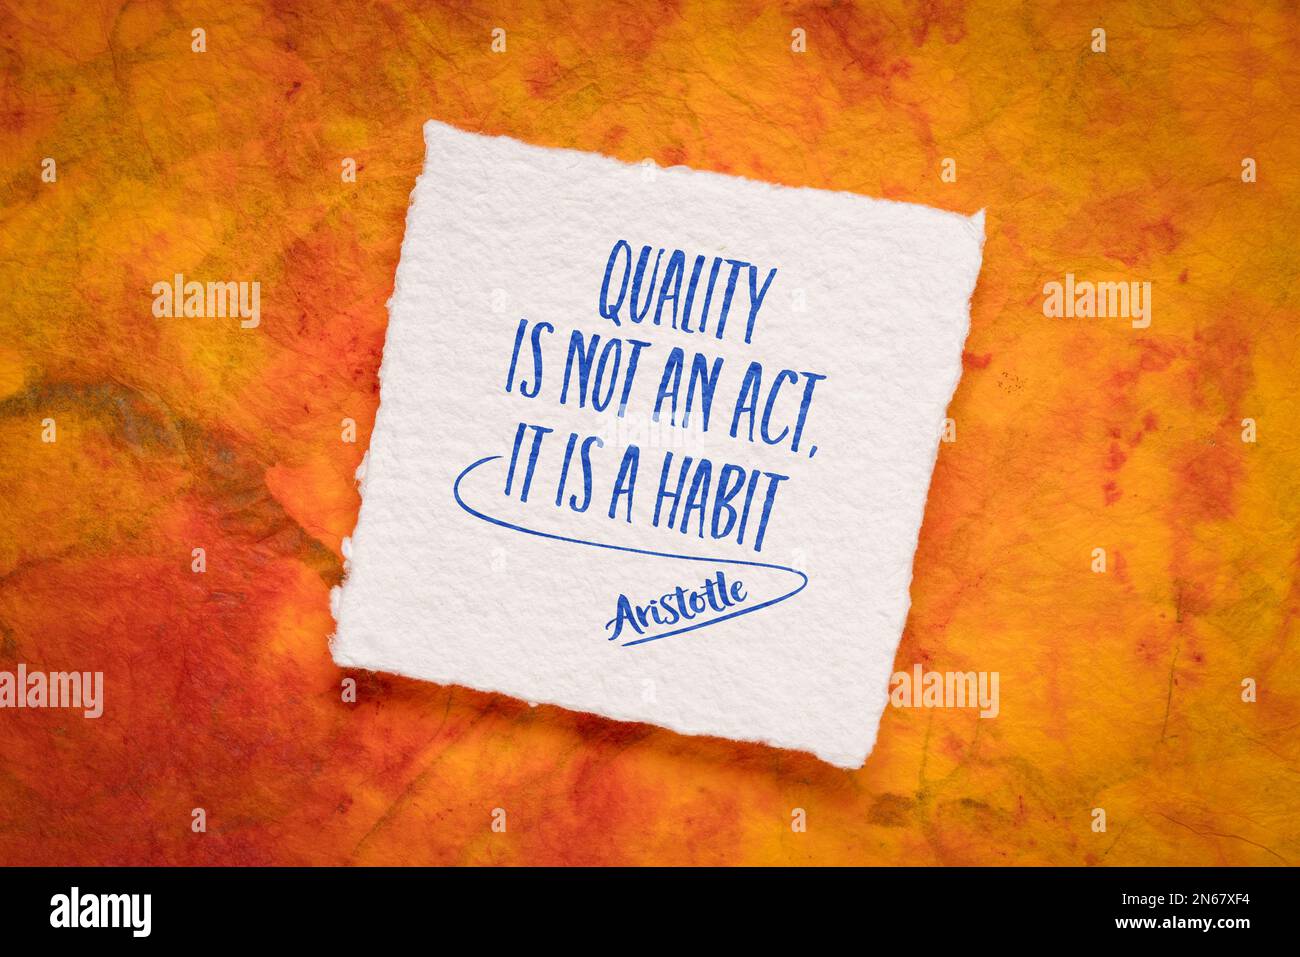 quality is not an act, it is a habit, inspirational quote by Aristotle, an ancient Greek philosopher Stock Photo